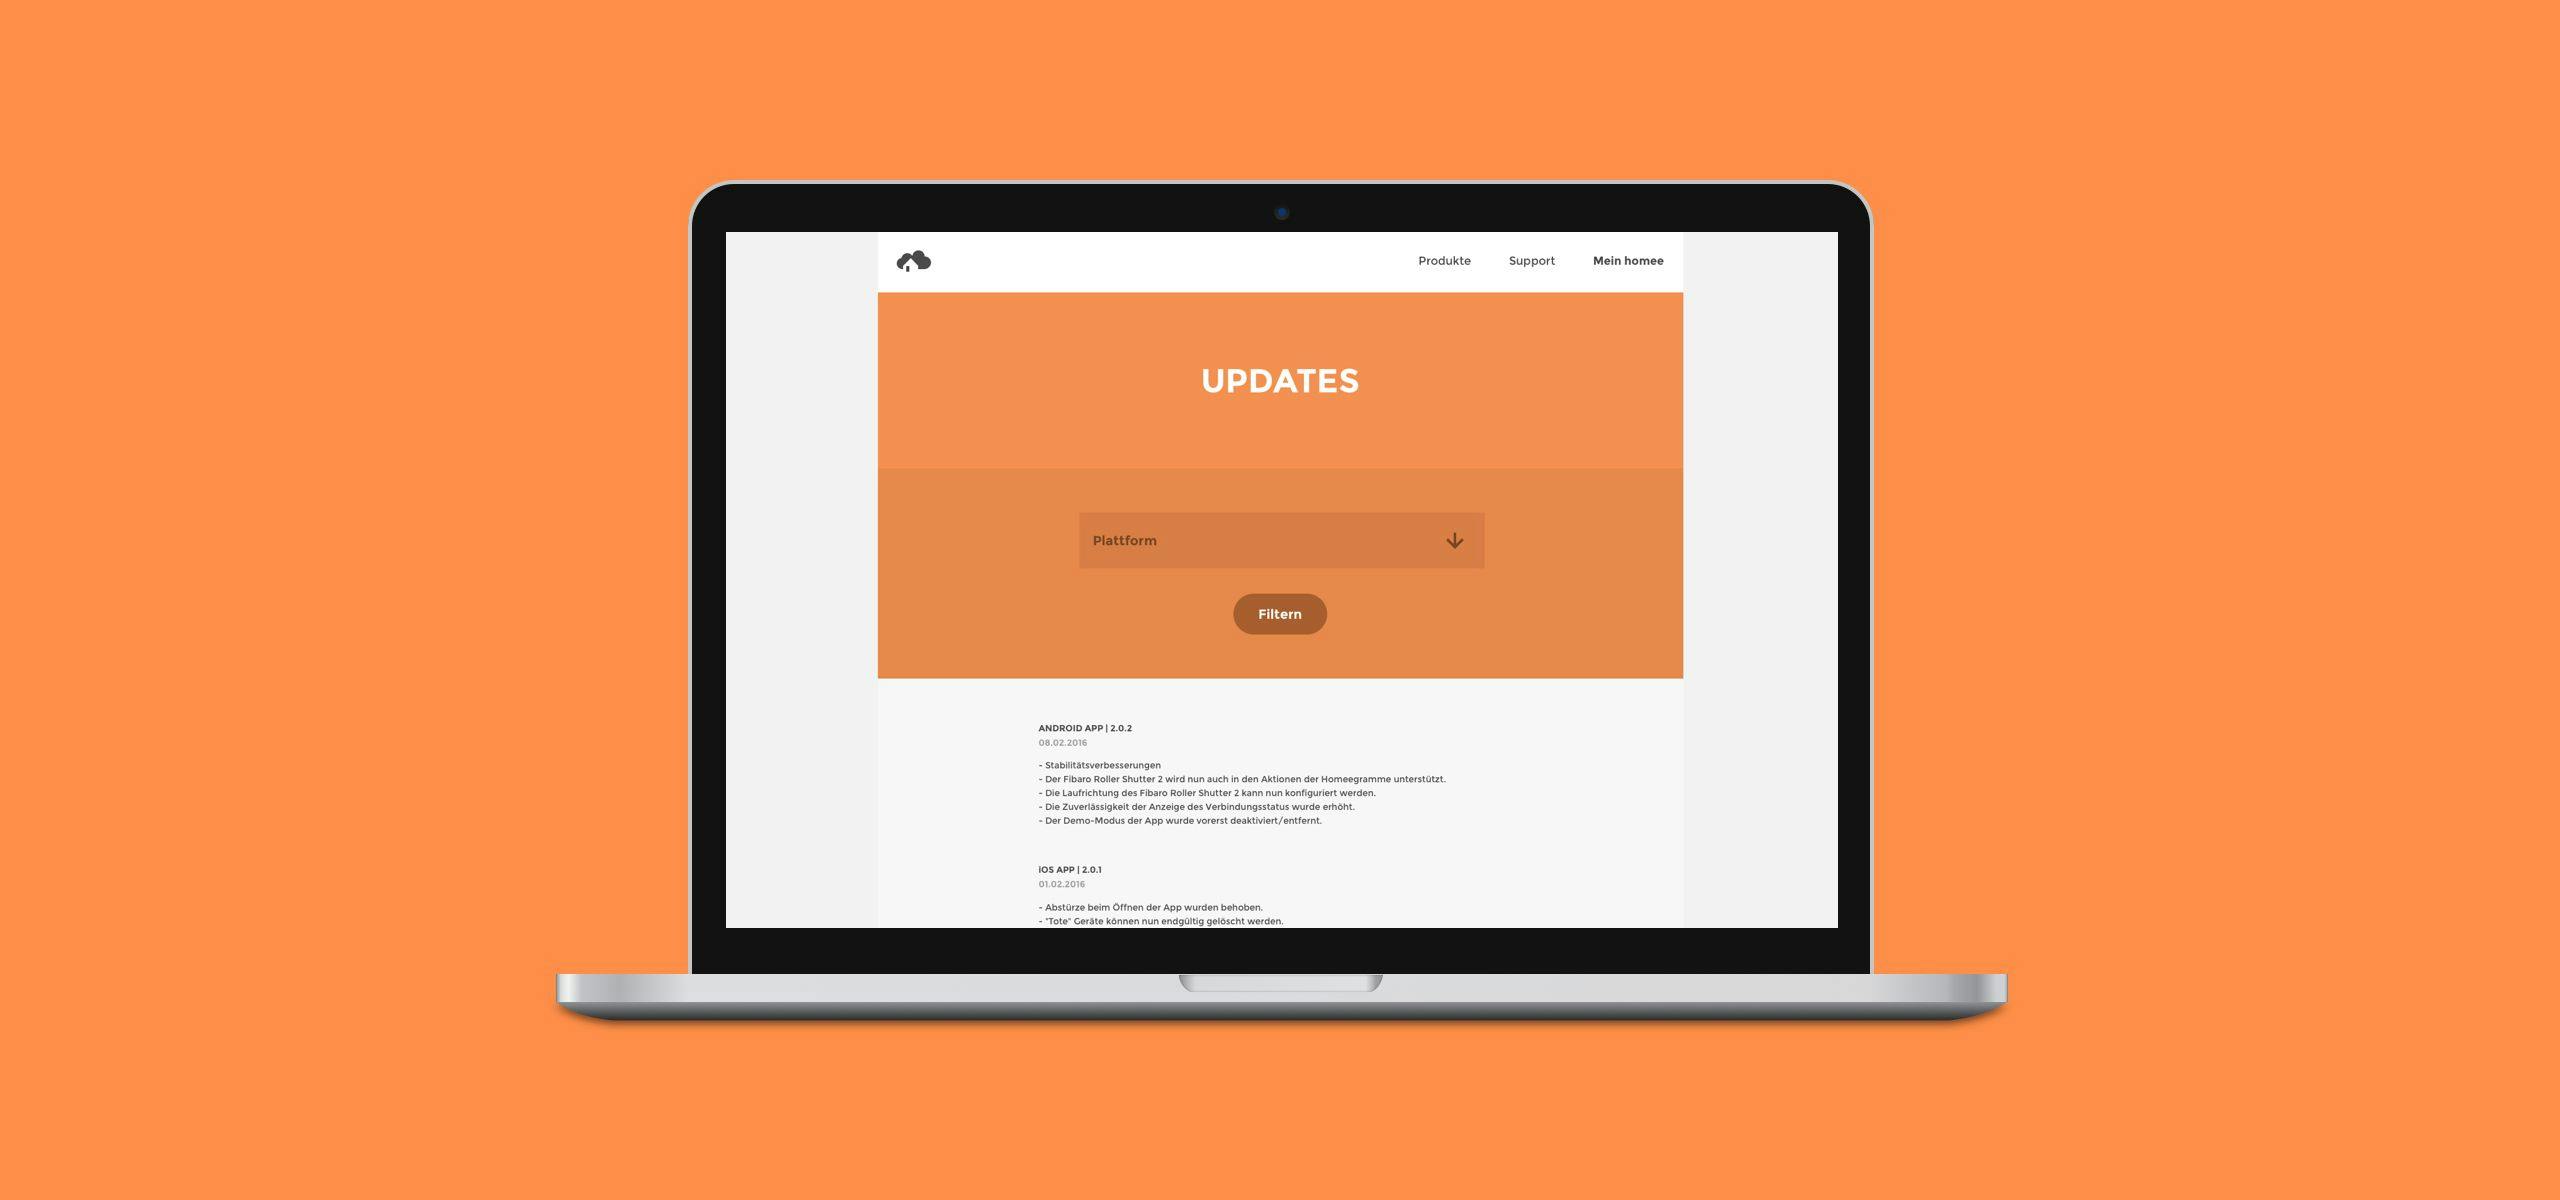 Updates page on the homee website